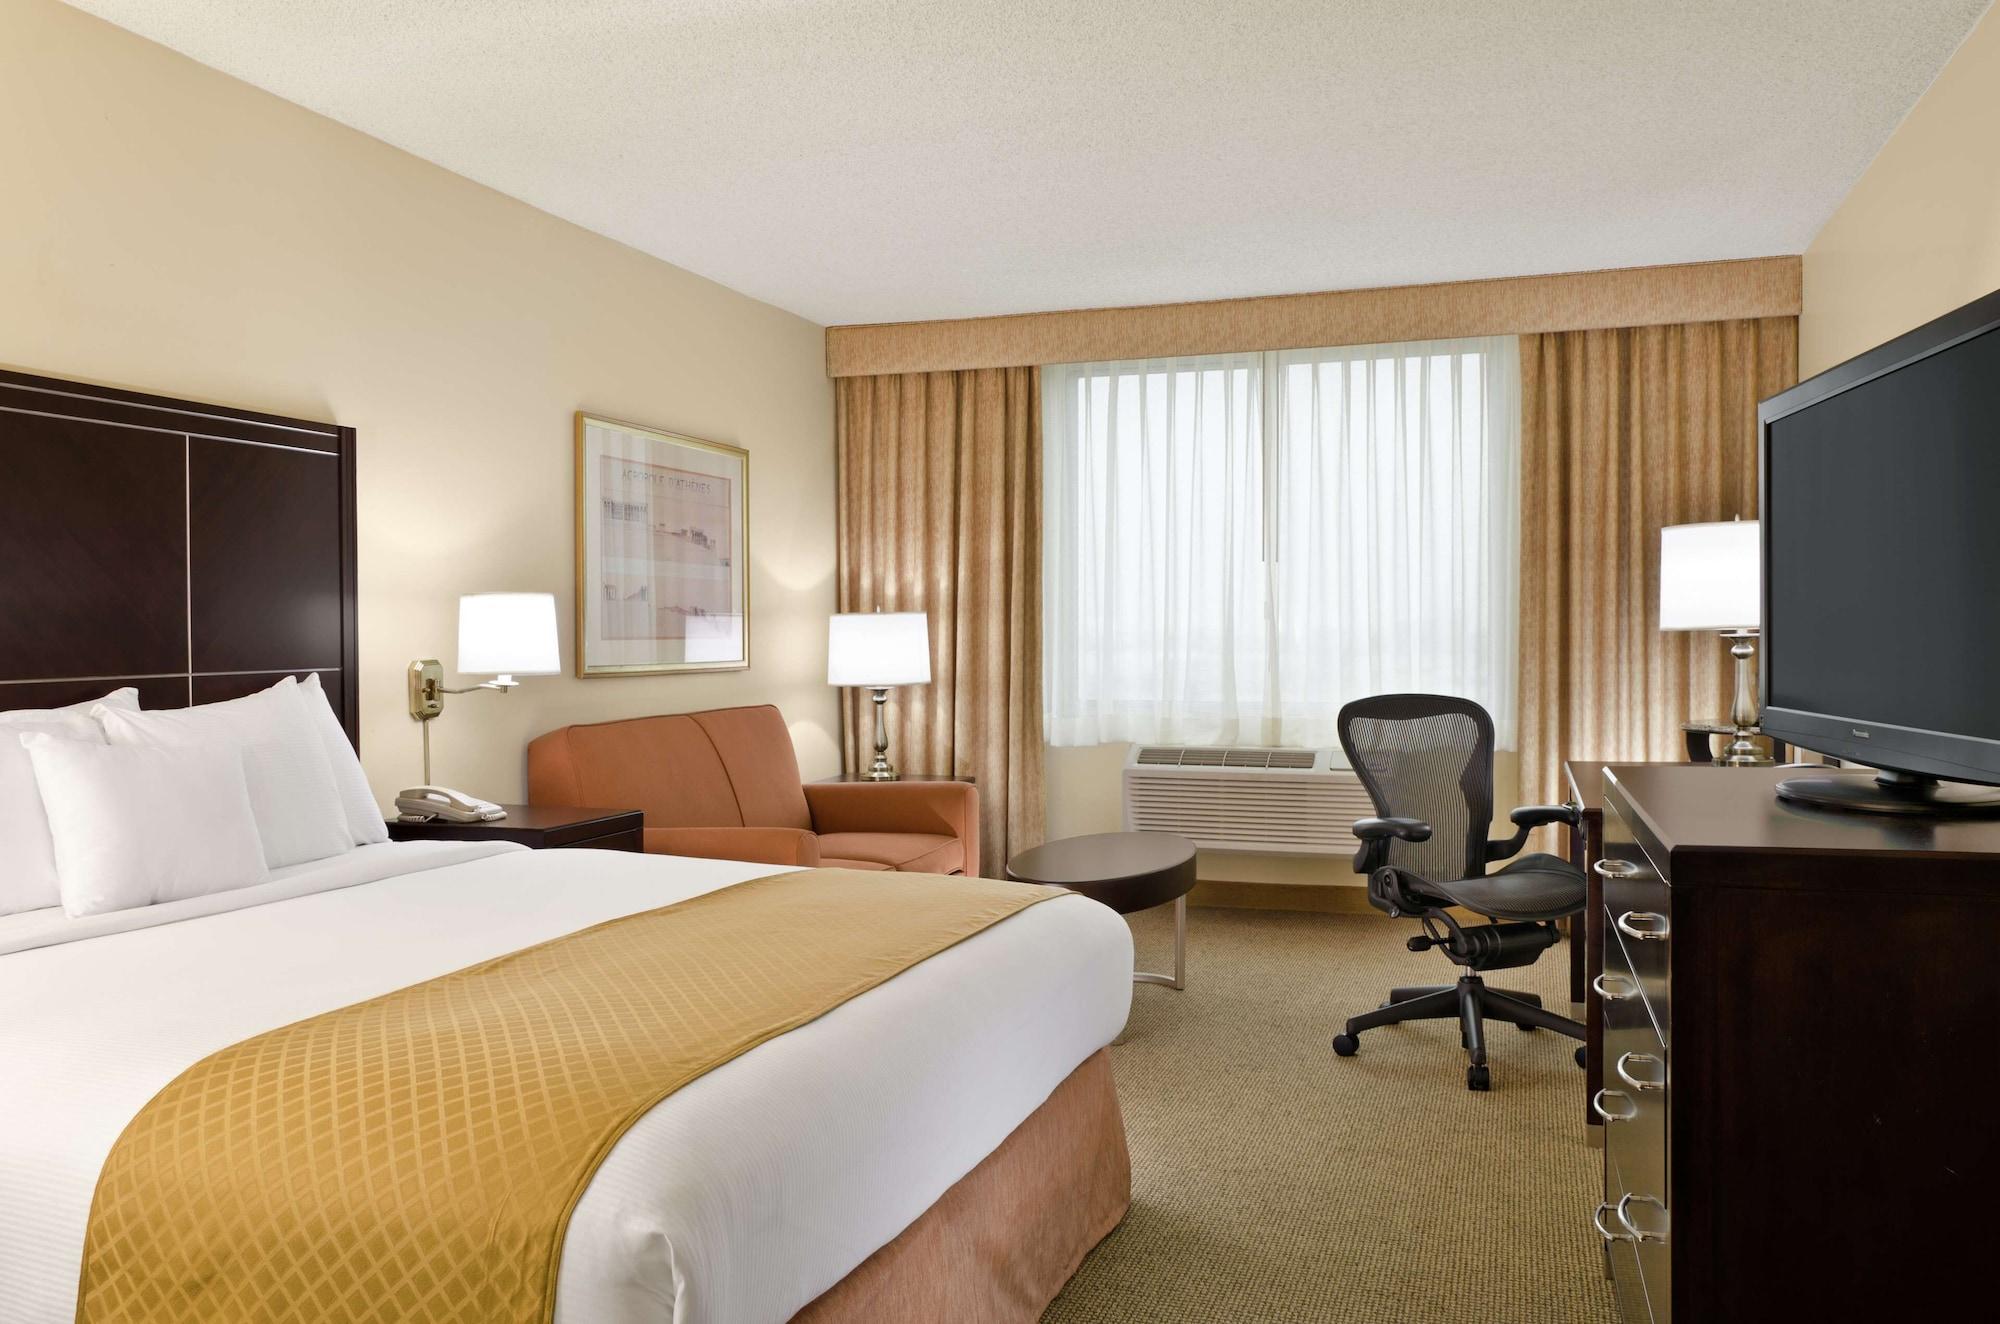 Doubletree By Hilton Los Angeles/Commerce Room photo